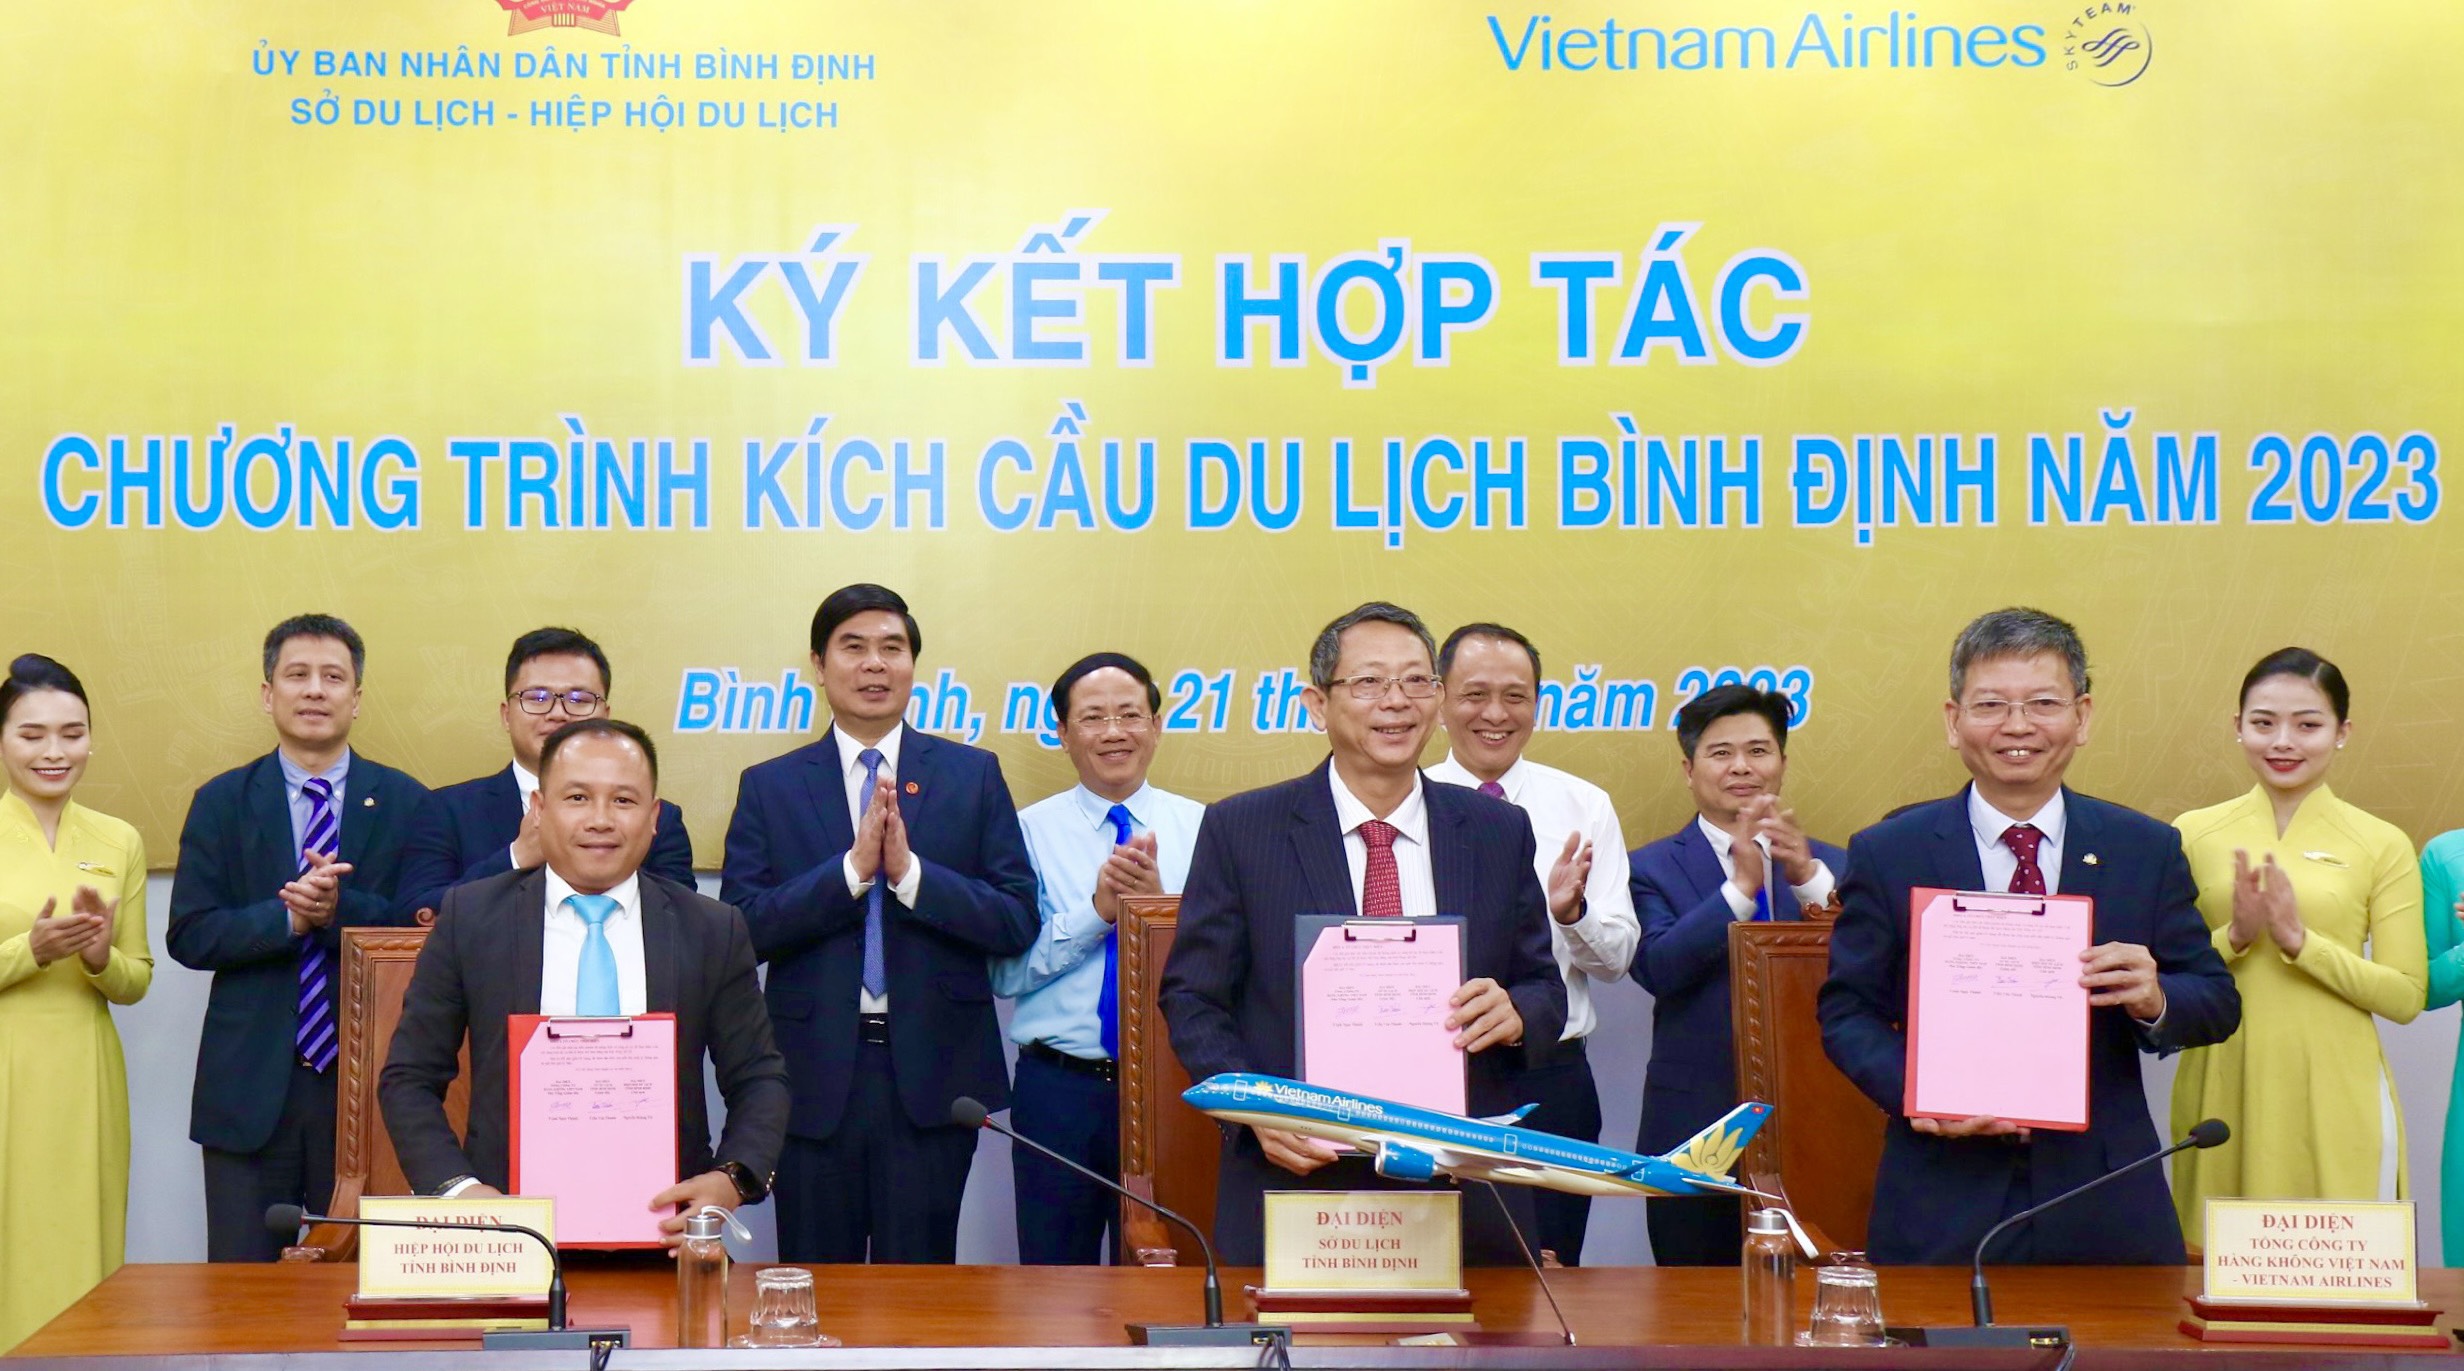 Binh Dinh Provincial People's Committee works with Vietnam Airlines Corporation (Vietnam Airlines)